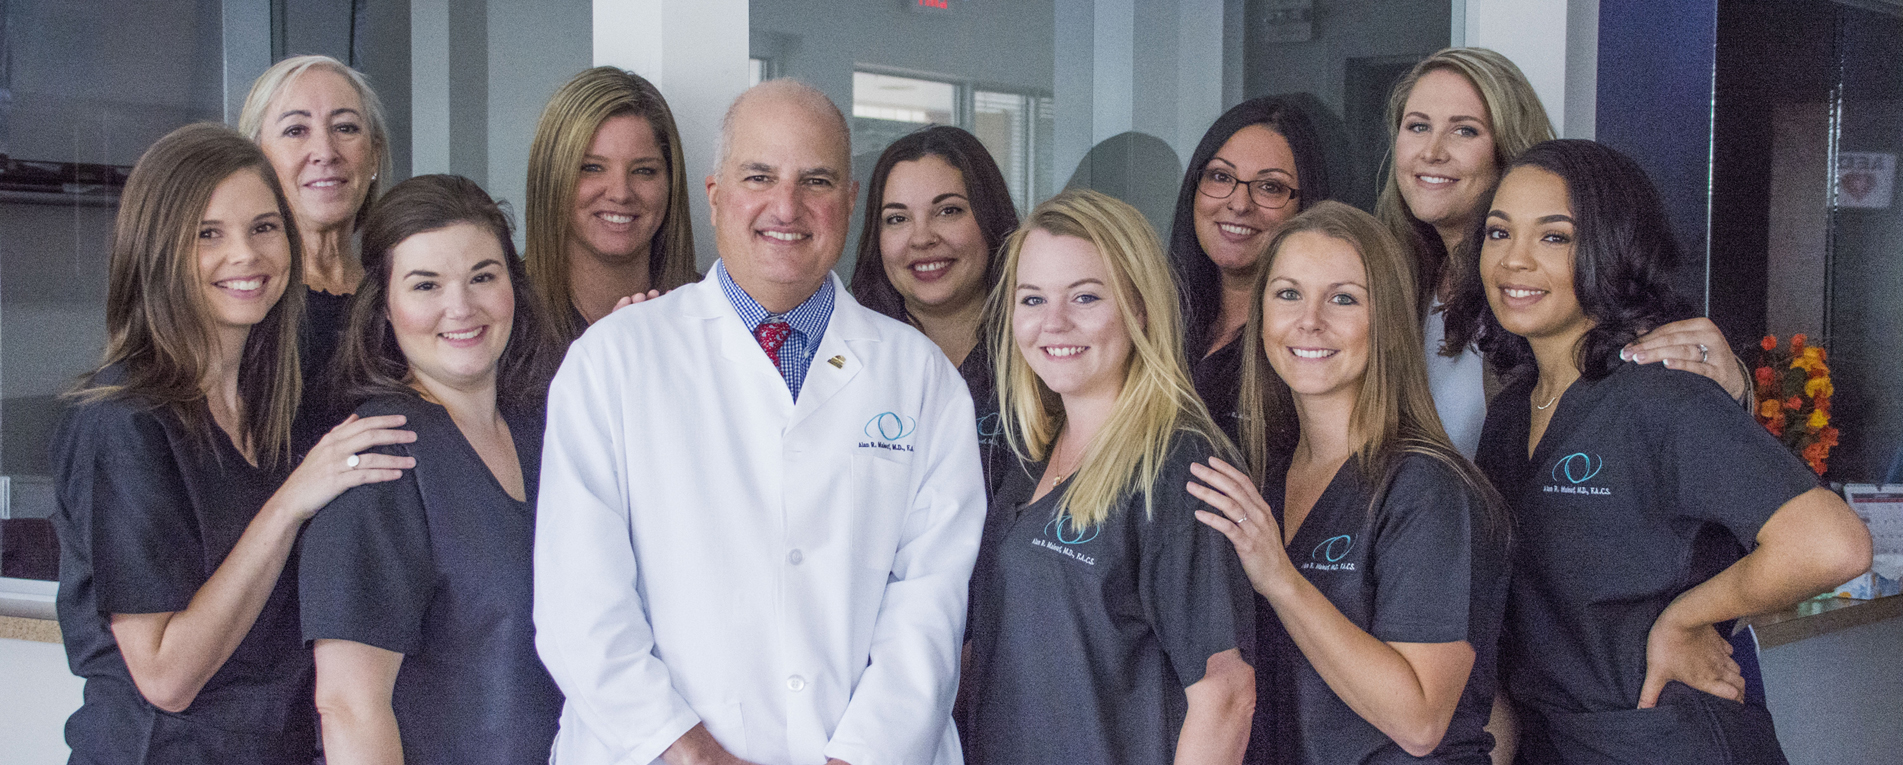 Our mission is to provide our family of patients with expert and personal ophthalmic medical and surgical care.